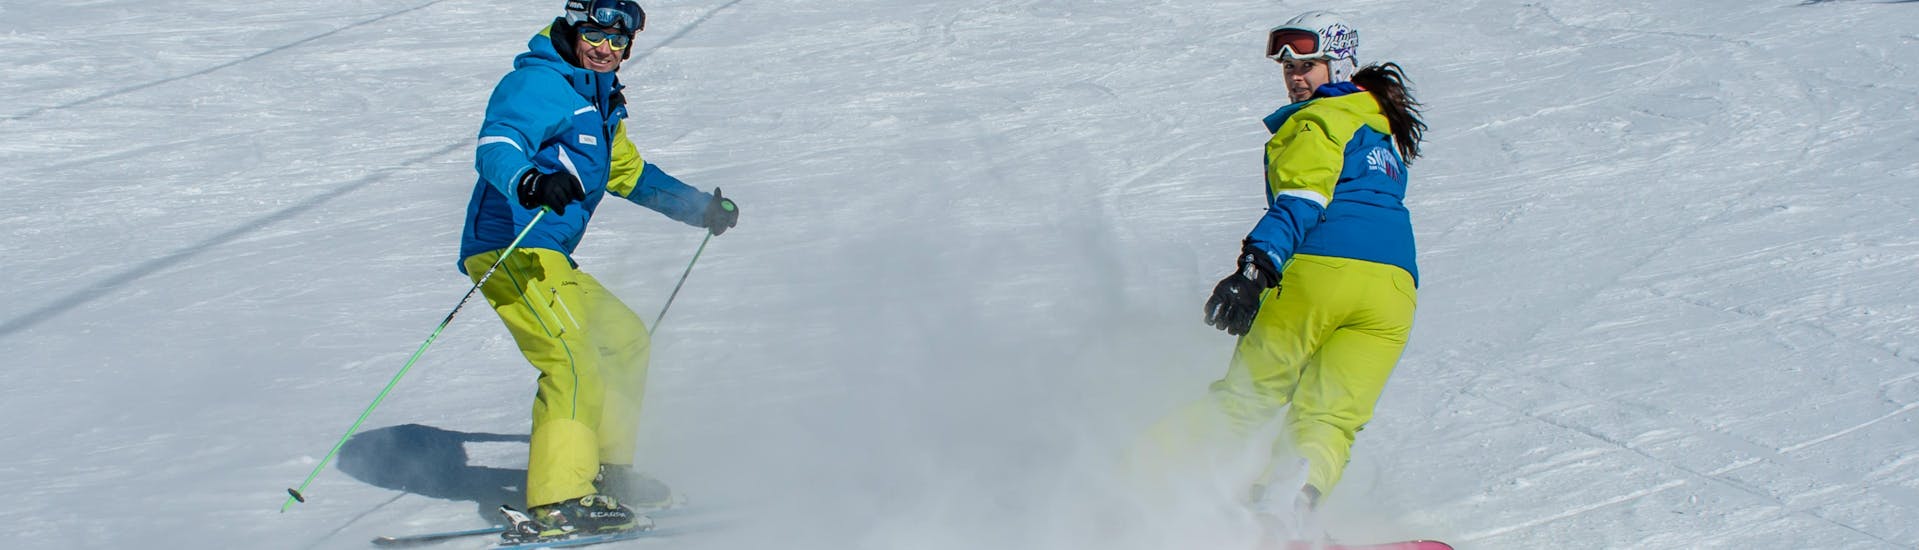 Adult Ski Lessons + Ski Hire Package for All Levels .